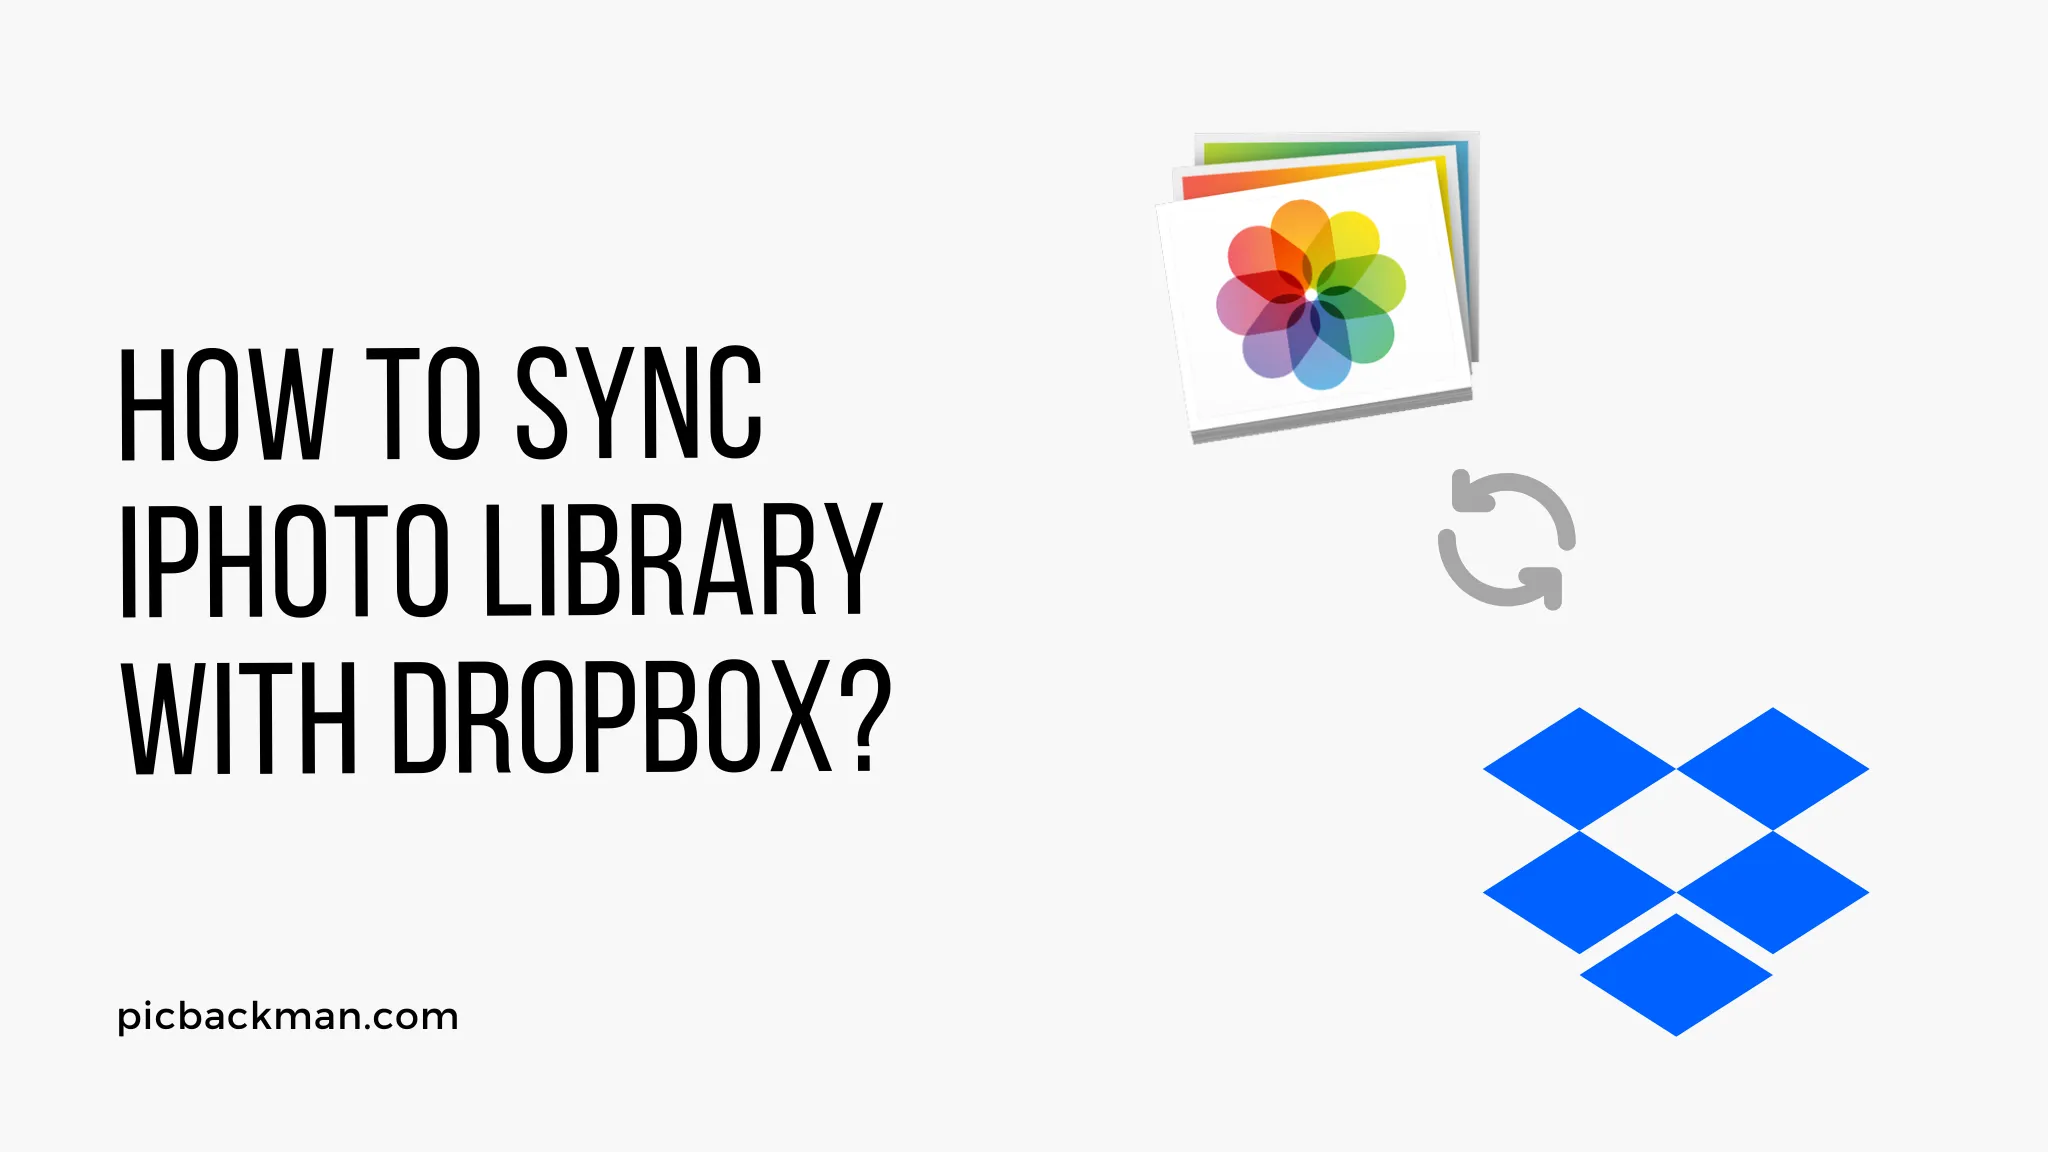 How to Sync iPhoto Library with Dropbox?